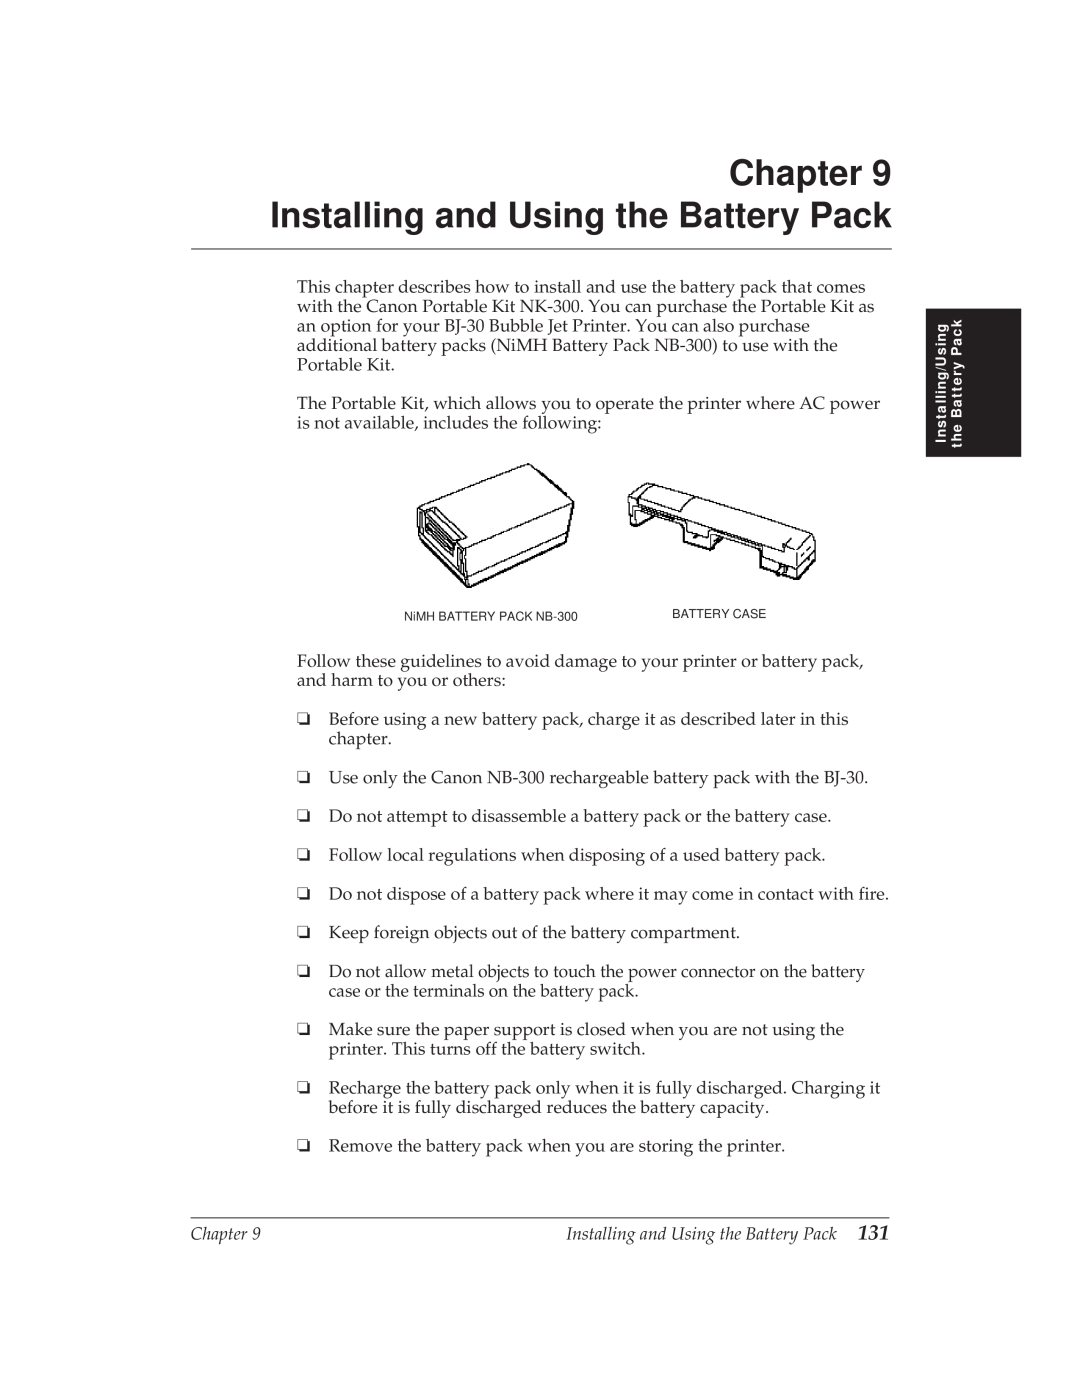 Canon BJ-30 manual Installing and Using the Battery Pack 